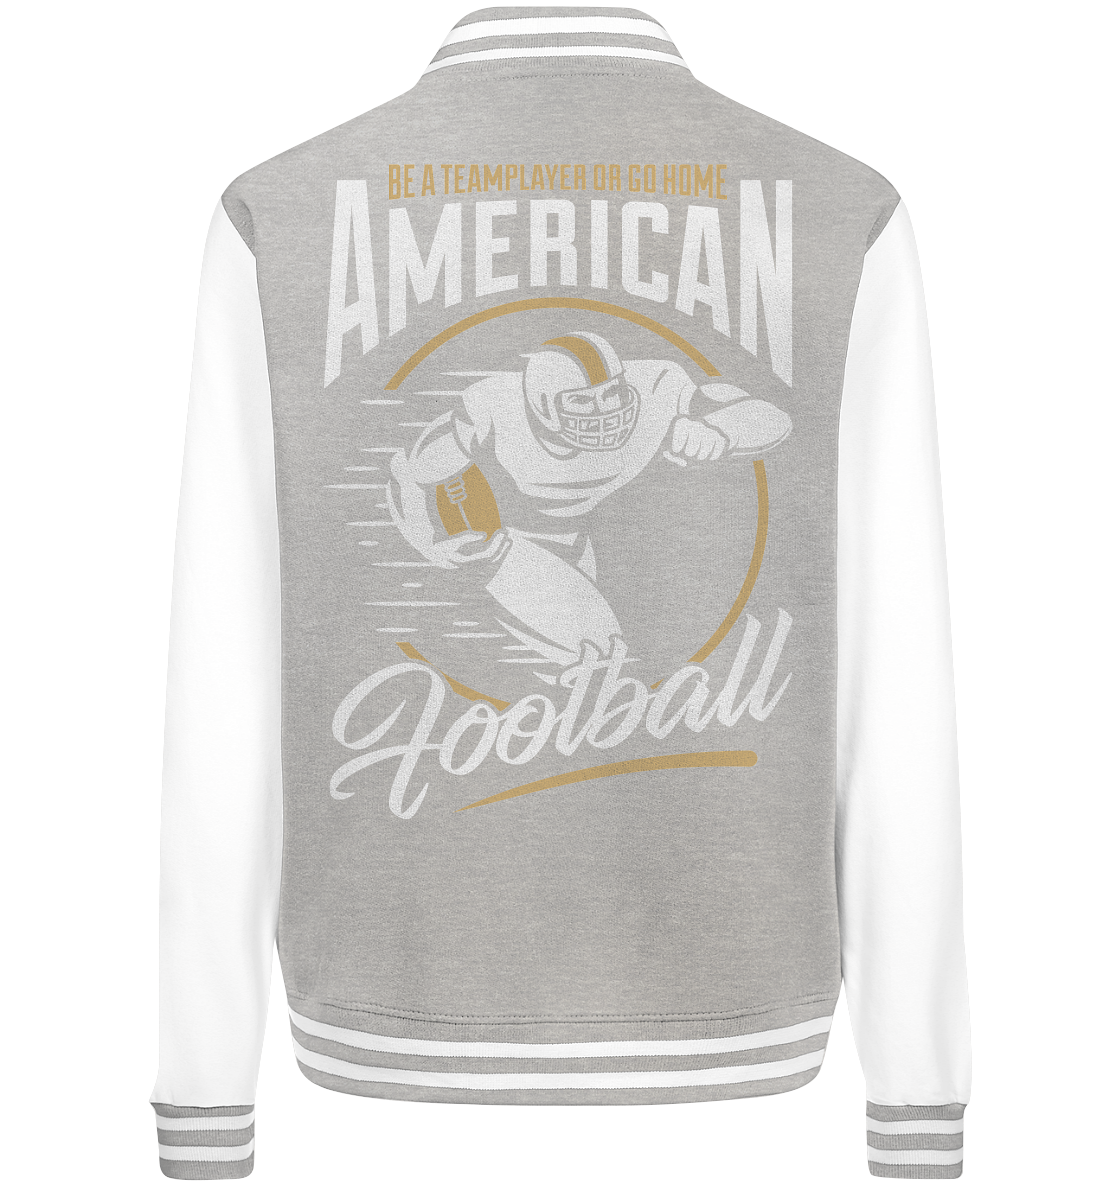 Teamplayer American Football - College Jacket - Football Unity Football Unity